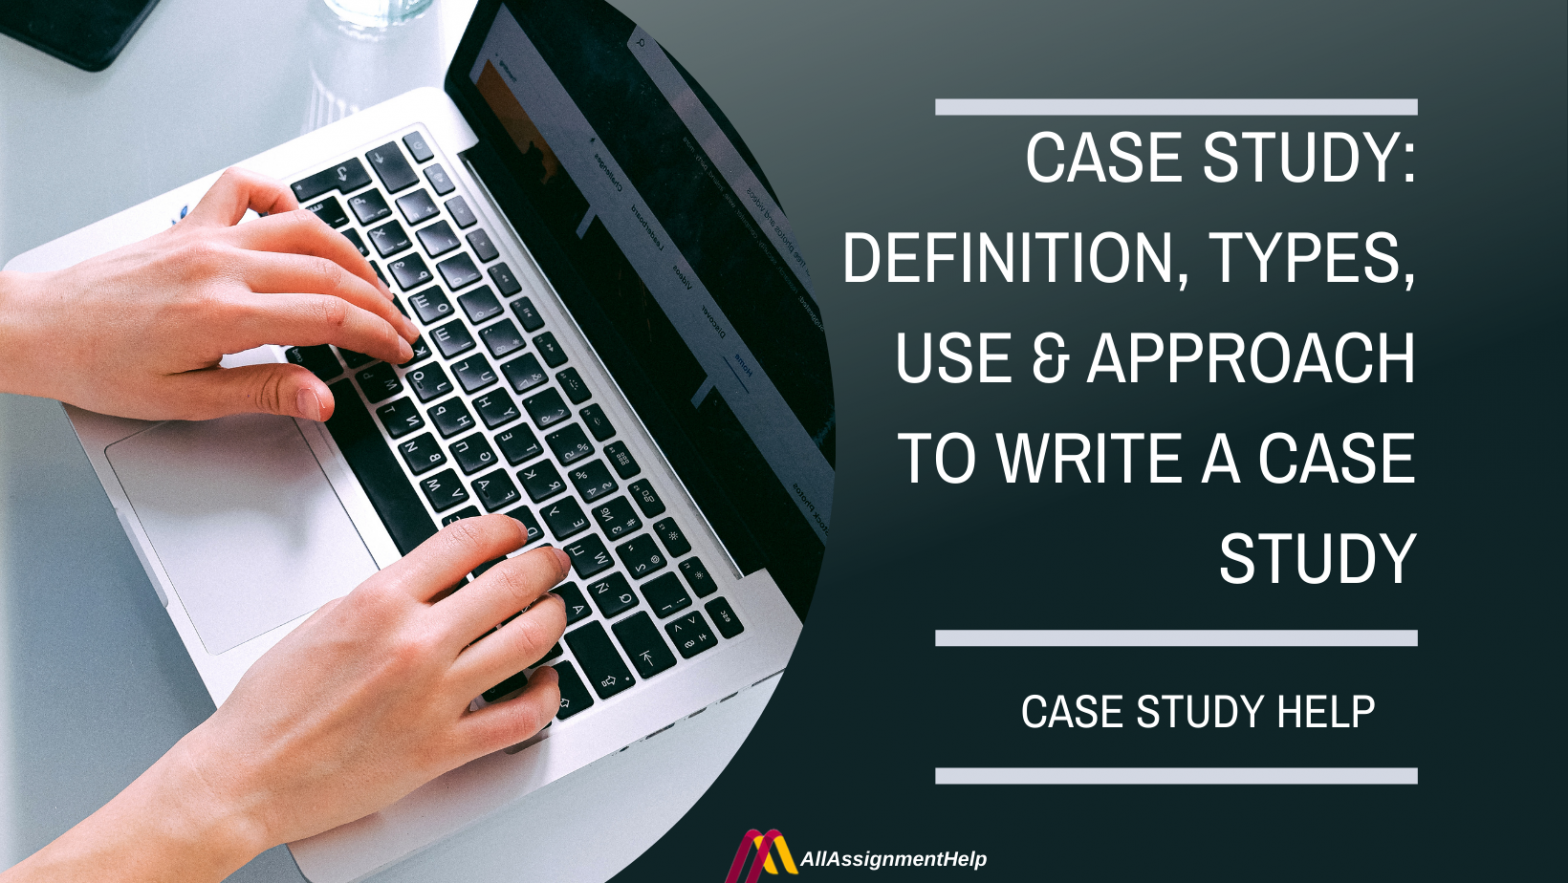 Case Study: Definition, Types, Use & Approach to Write a Case Study